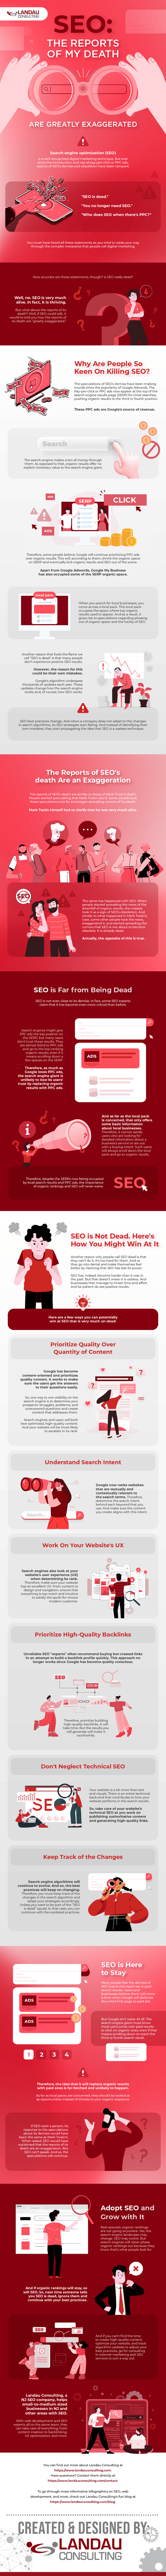 SEO: "The-Reports-of-My-Death-Are-Greatly-Exaggerated-Infographic-image